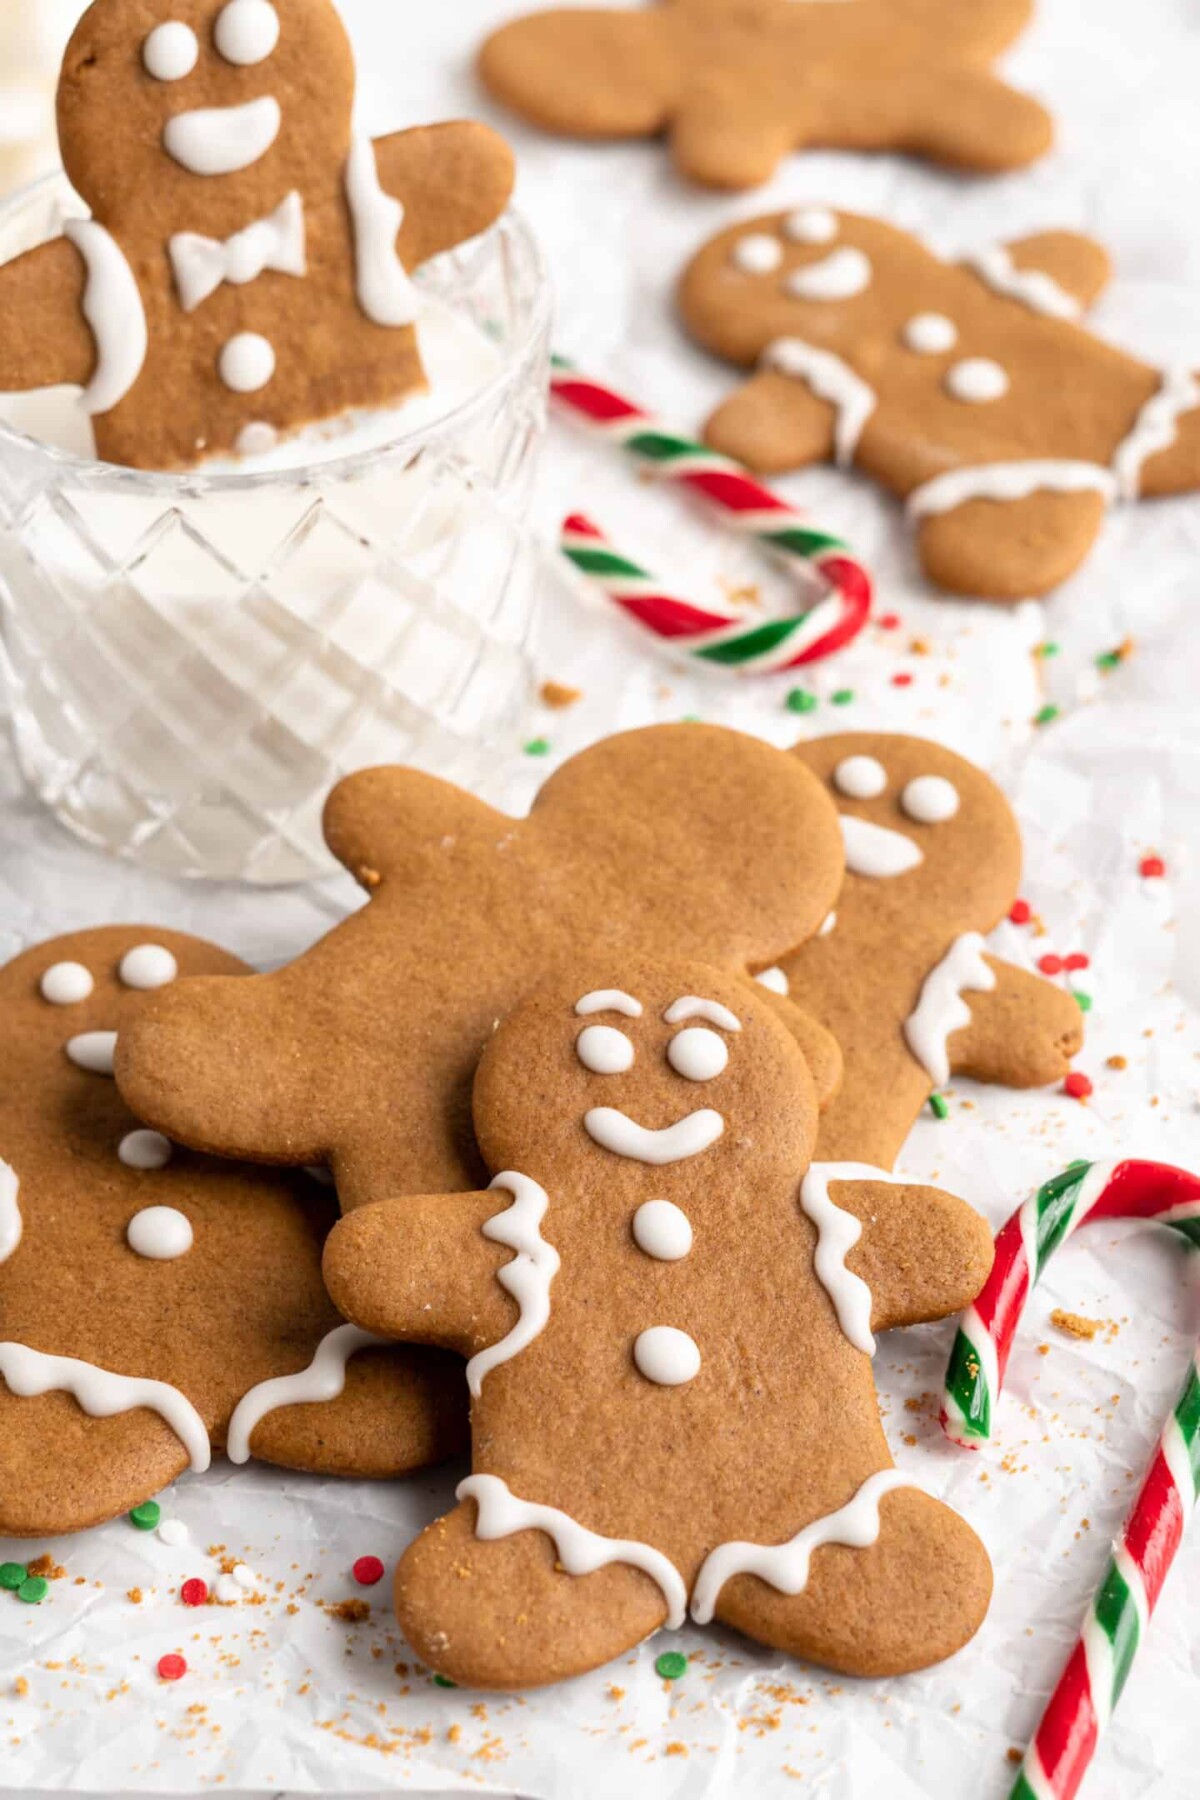 A pile of decorated gingerbread men cookies and one undecorated cookie, with candy canes around